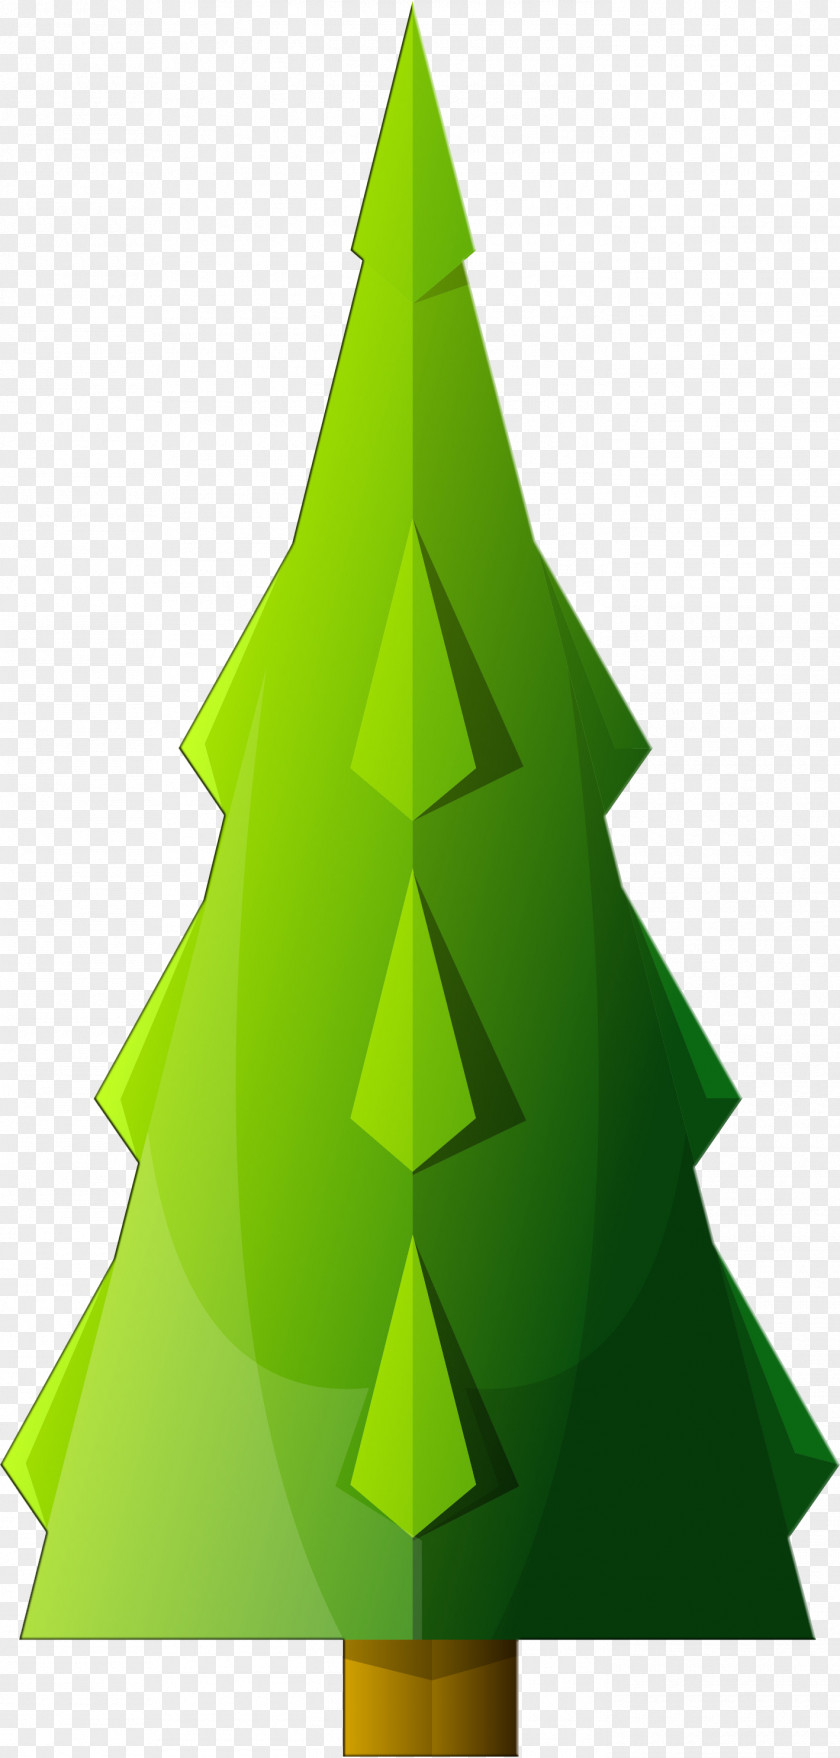 Fir-tree Paper Christmas Tree Origami Step By Ornament PNG